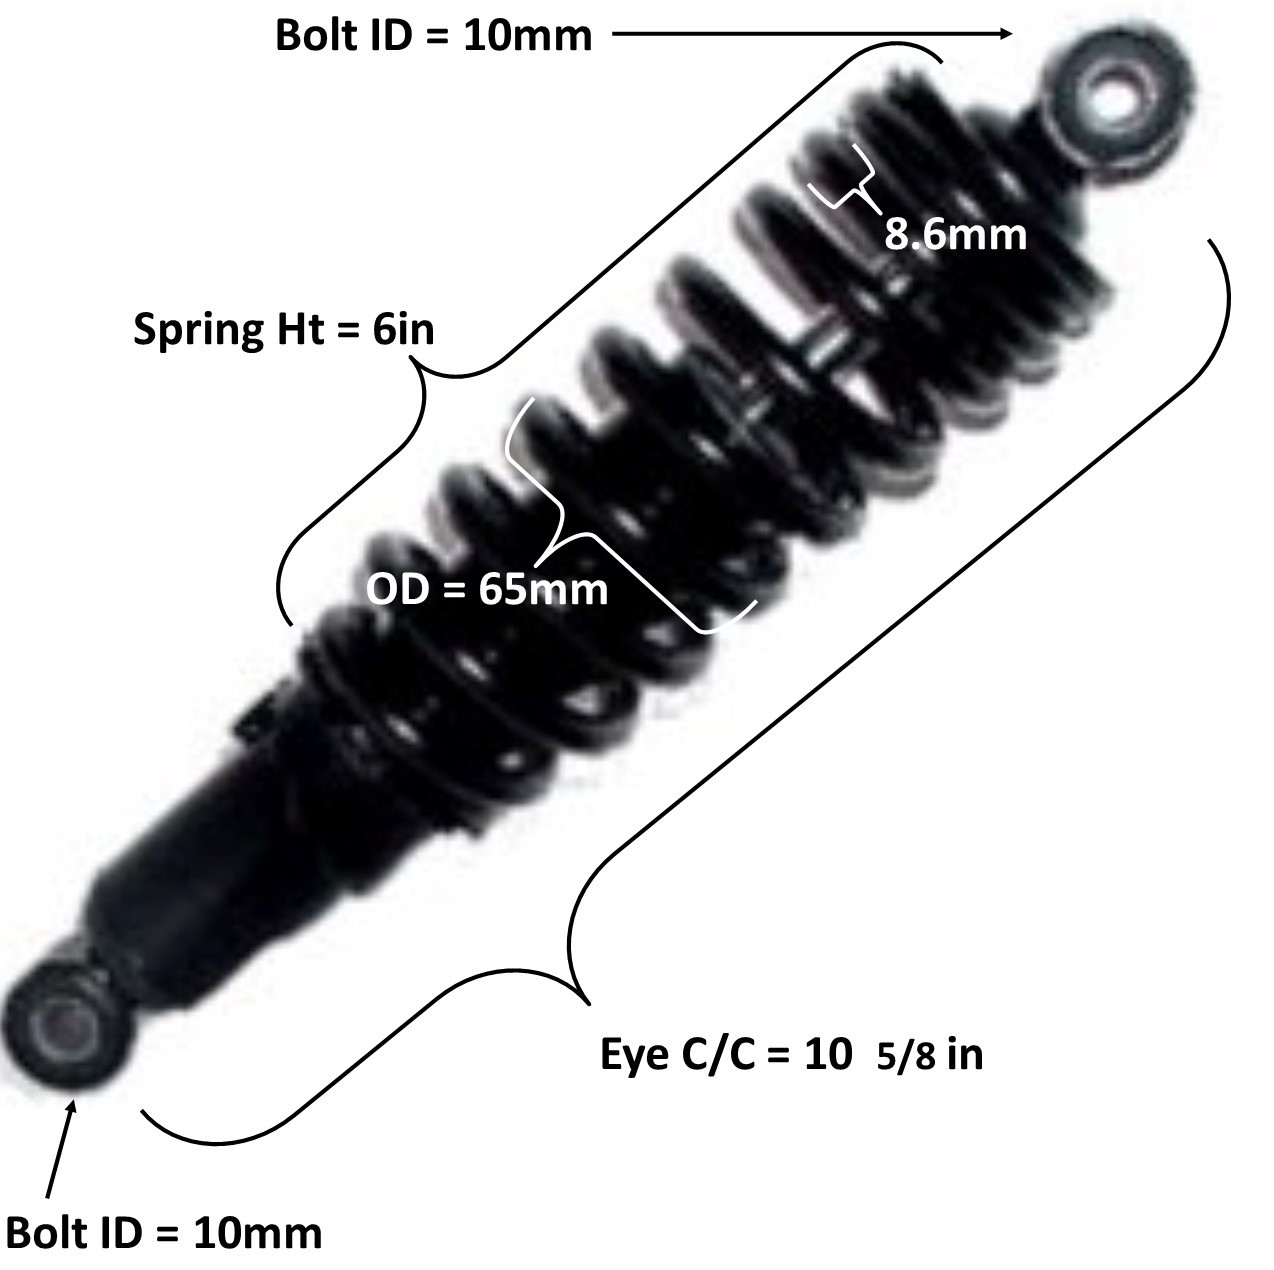 Rear Shock Eye c/c=10 5/8 Spring Ht=6in Spring OD=65mm Spring Thickness=8.6mm Bolt ID Top=10 Bottom=10 Fits Many 125-250cc ATVs